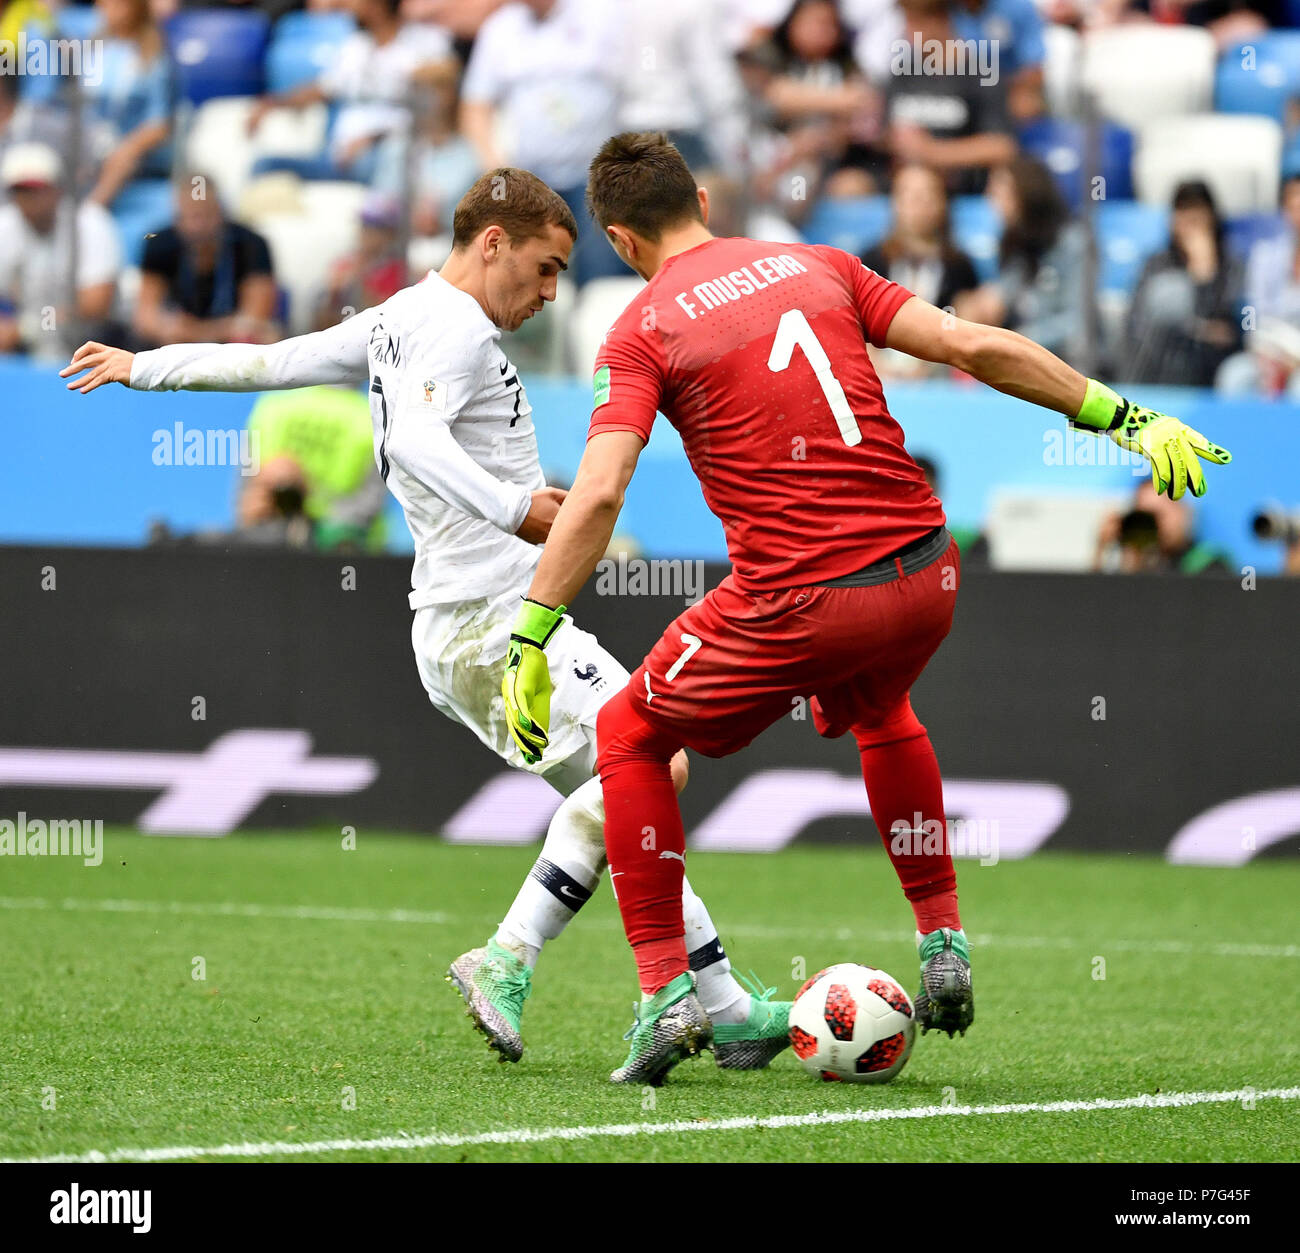 Nizhny Novgorod, Russia. 6th July, 2018. Goalkeeper Fernando Muslera (R) of Uruguay vies with Antoine Griezmann of France during the 2018 FIFA World Cup quarter-final match between Uruguay and France in Nizhny Novgorod, Russia, July 6, 2018. Credit: Liu Dawei/Xinhua/Alamy Live News Stock Photo